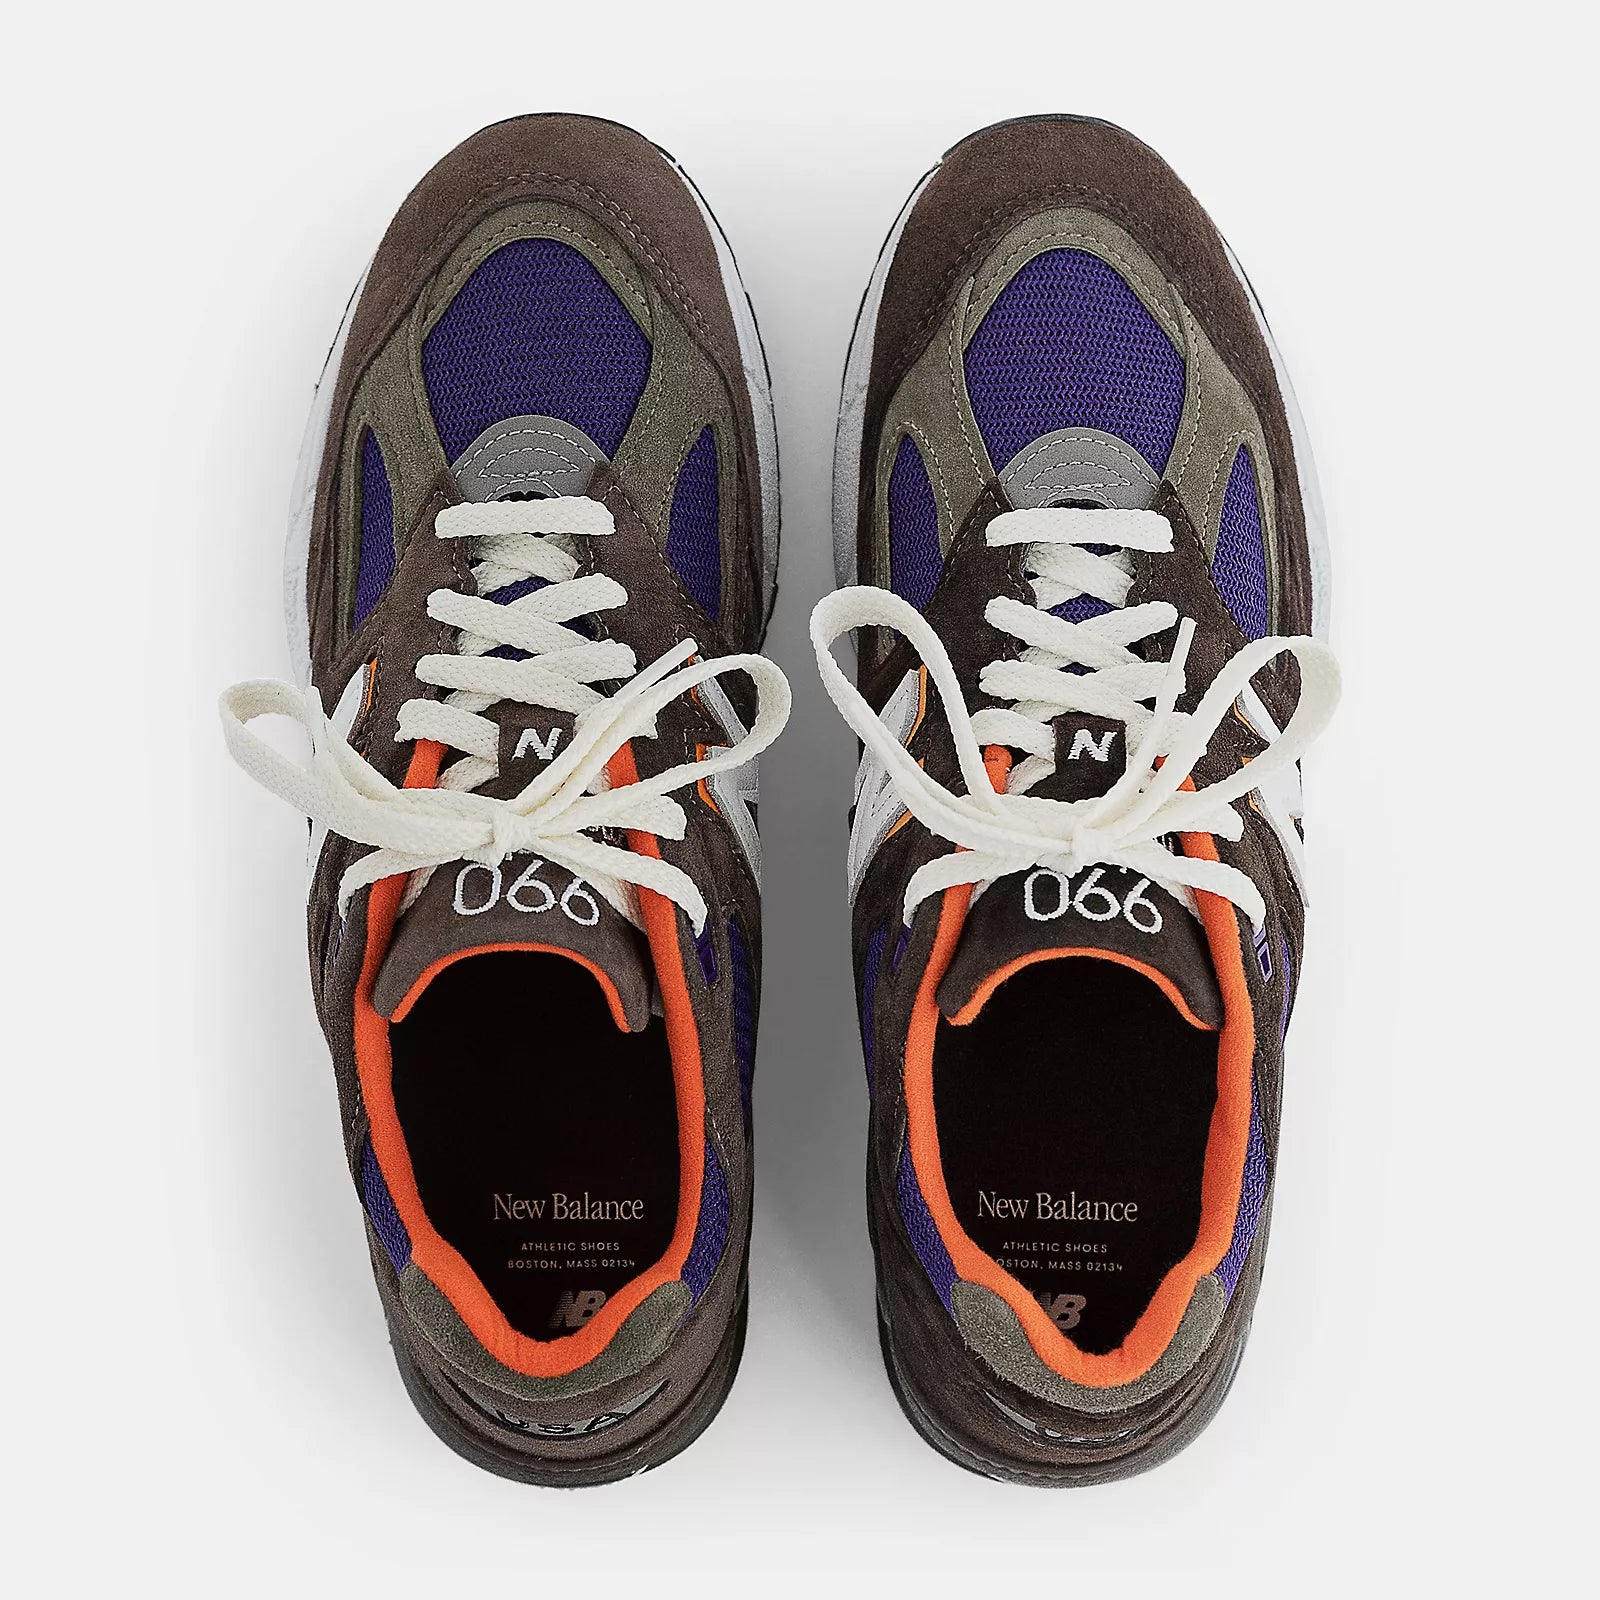 990V2 MADE IN THE USA - BROWN / GREY | lapstoneandhammer.com